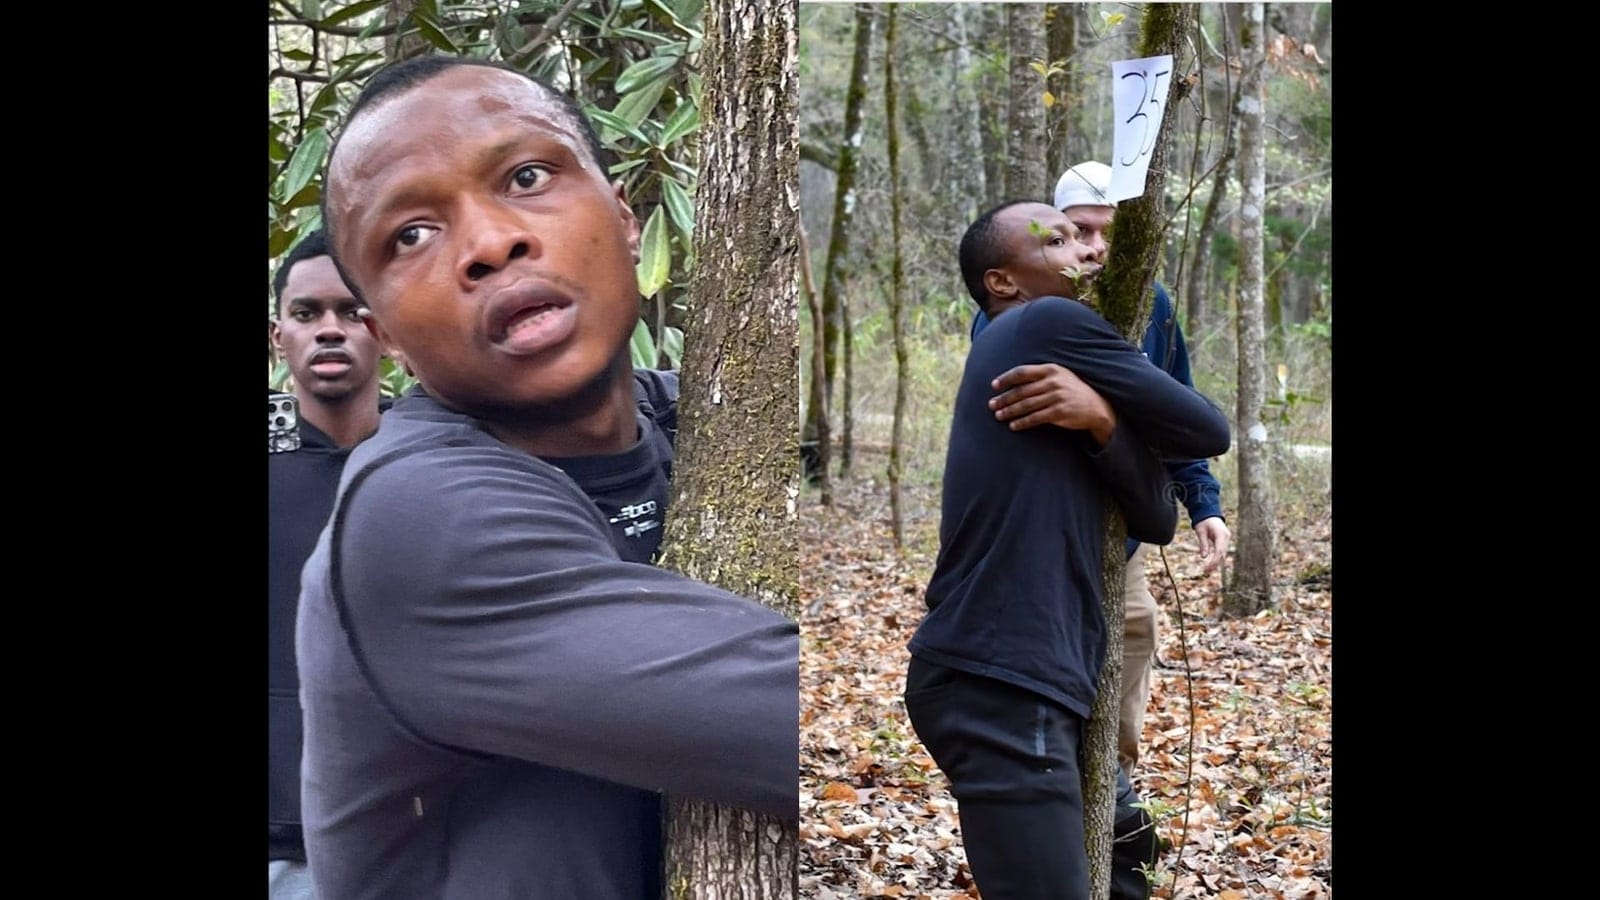 Ghana man creates Guinness World Record for hugging over 1,100 trees in an hour. Watch